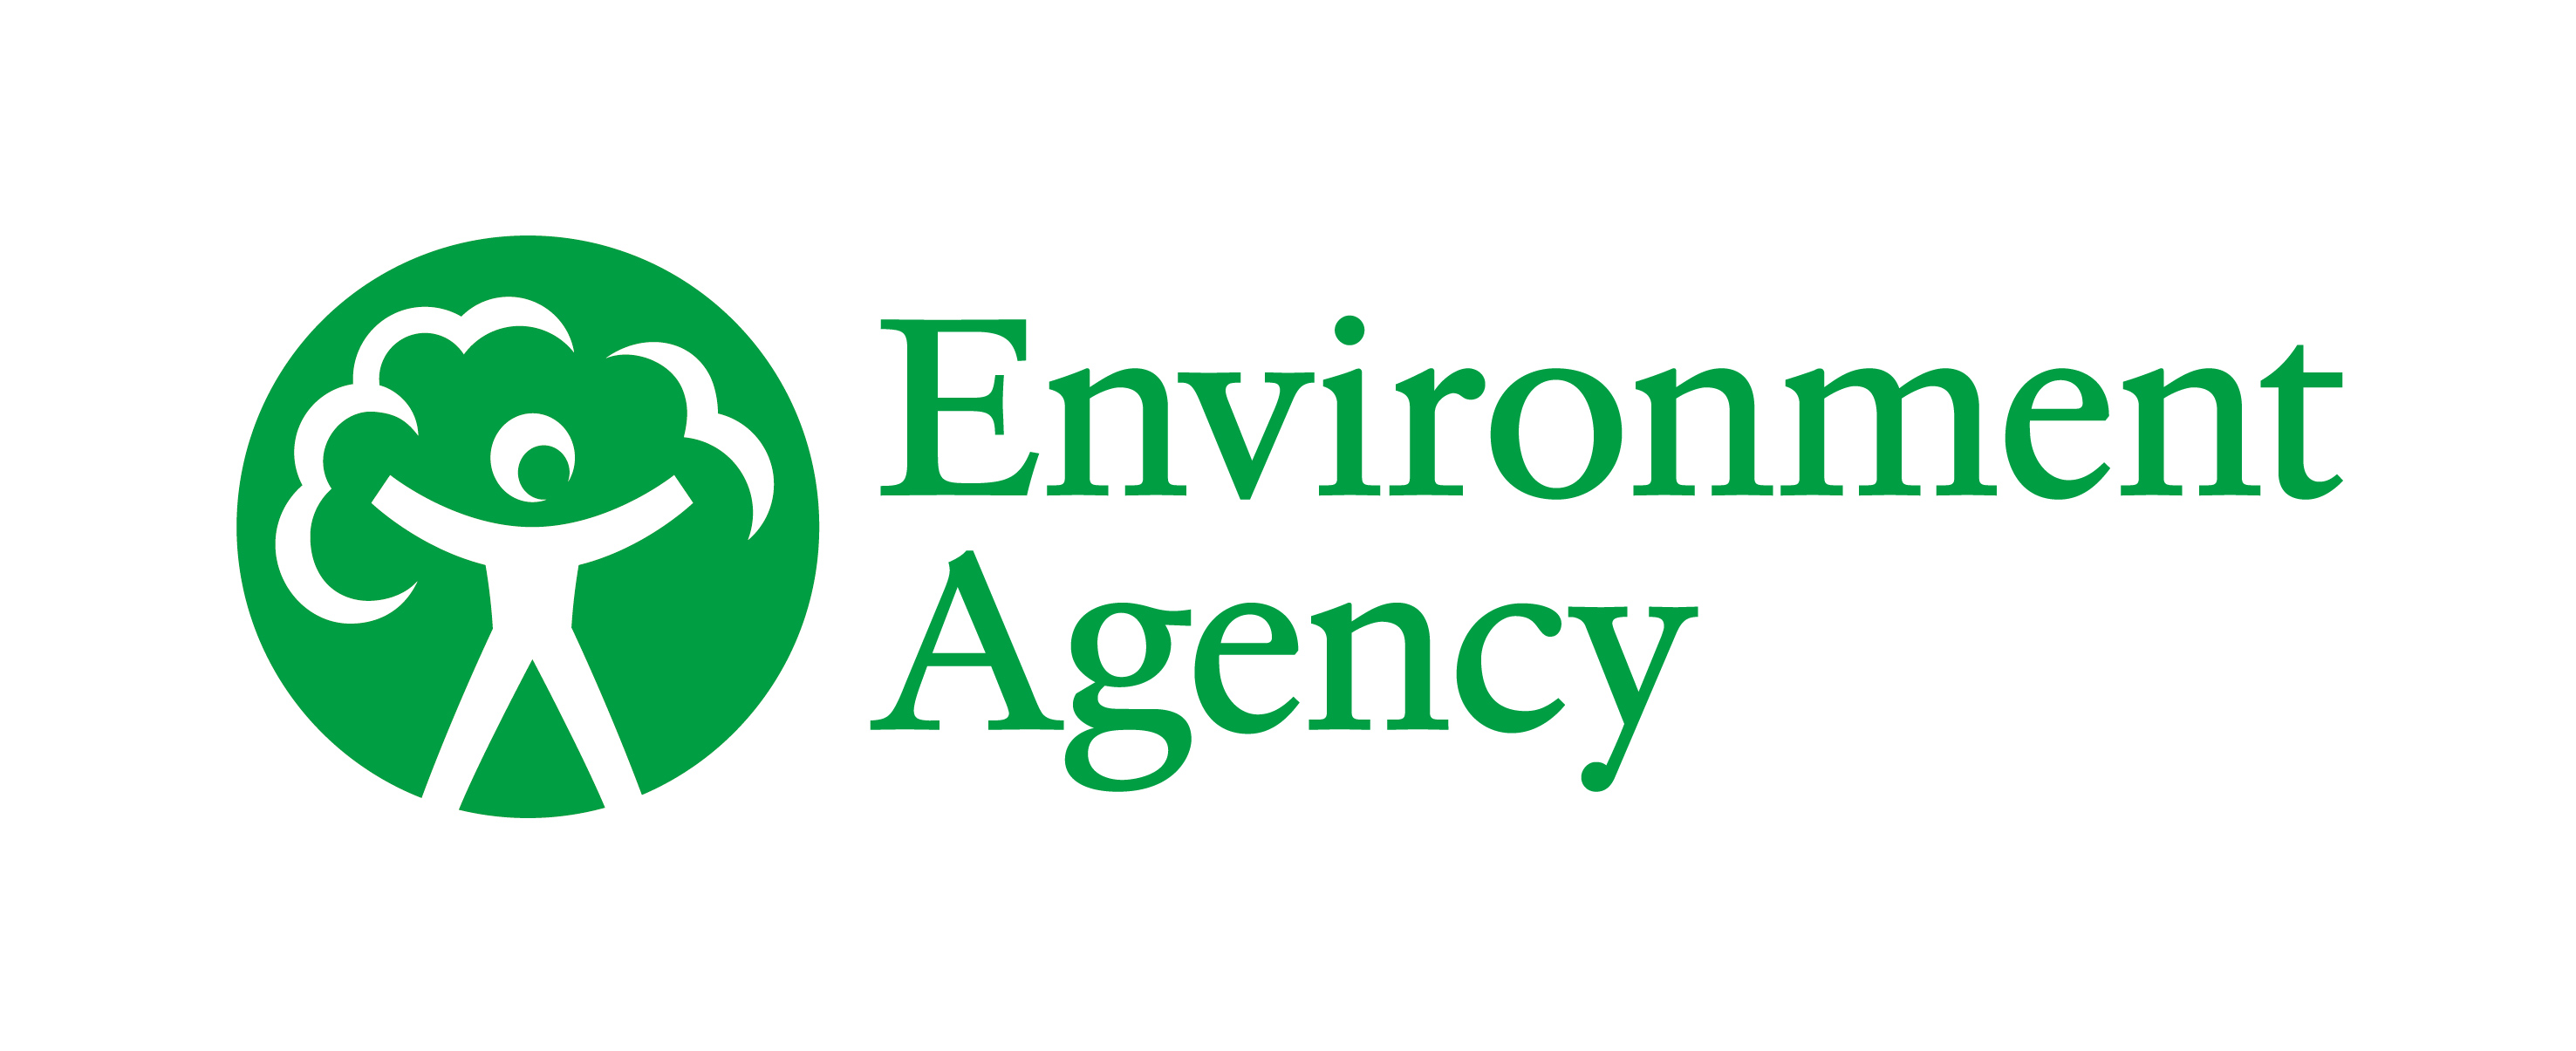 Environment Agency Consults on Standard Rules Environmental Permits